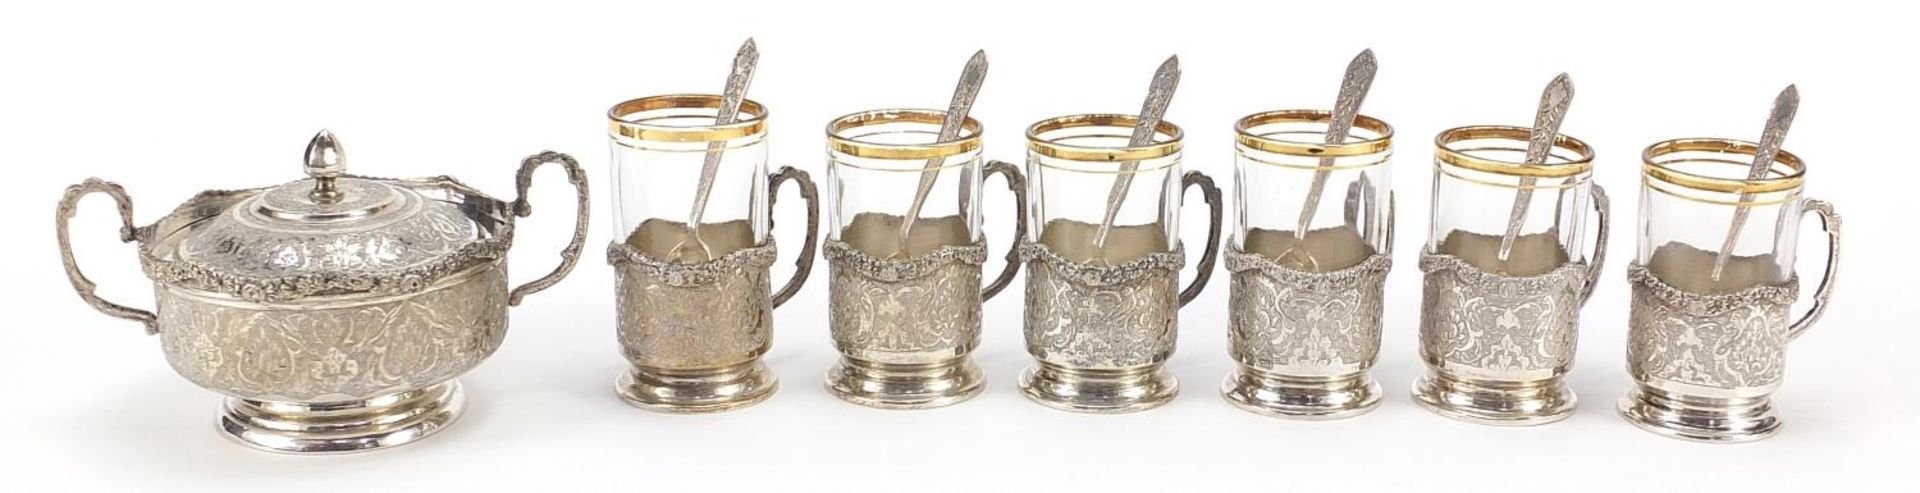 Persian silver twin handled bowl and cover and set of six silver and glass cups with silver